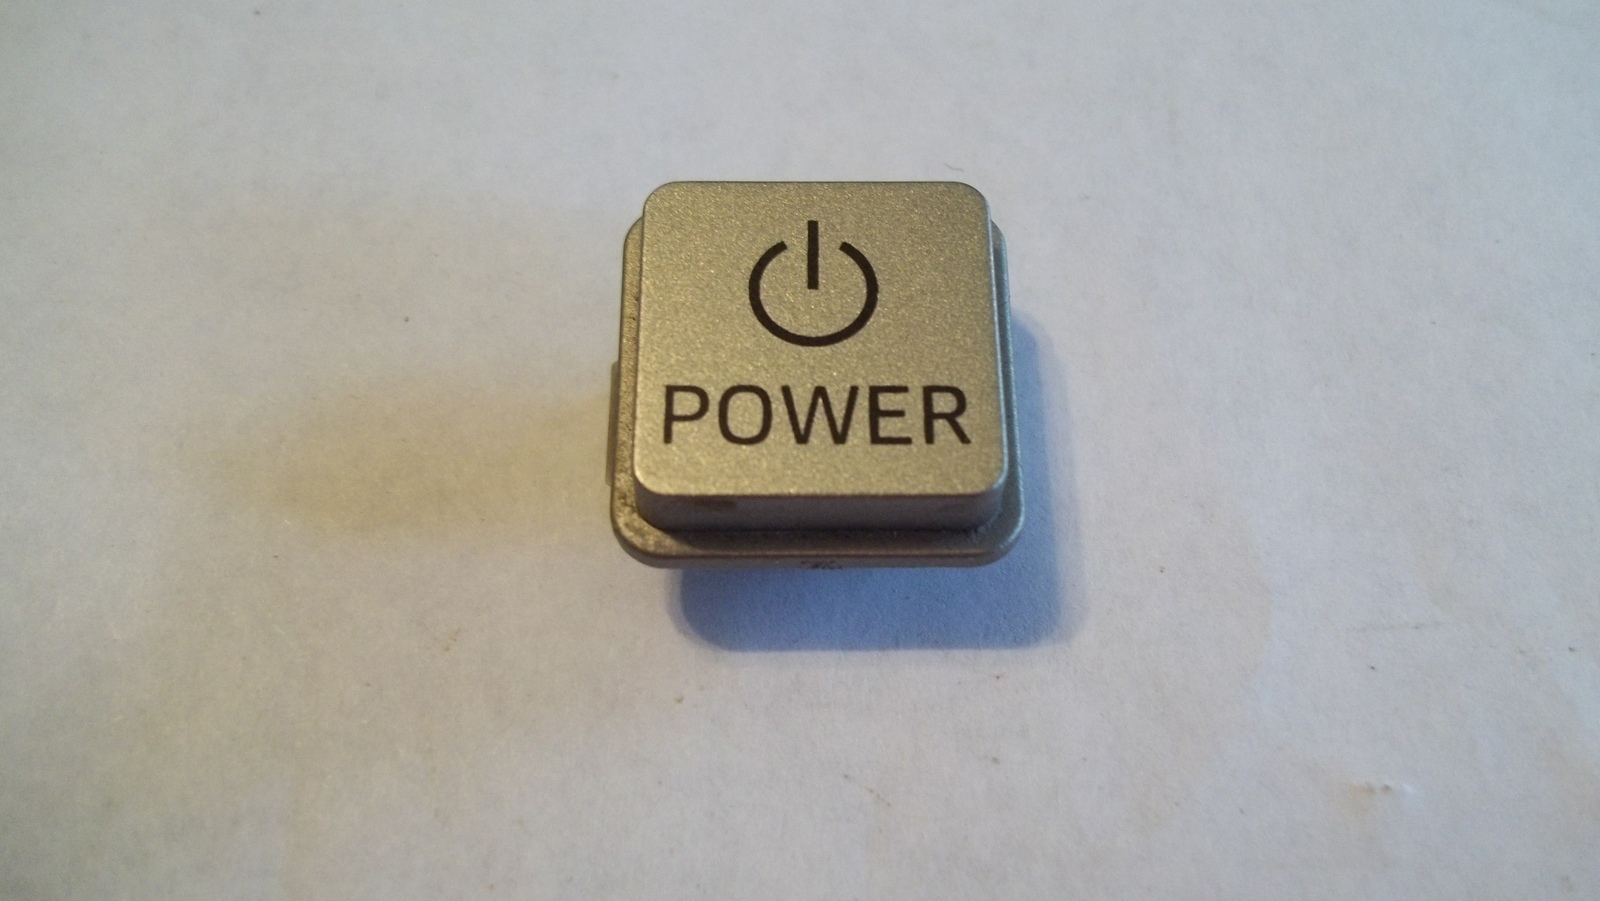 Primary image for Samsung Dishwasher Model DW80J3020US/AA Push Button Power DD81-01813A